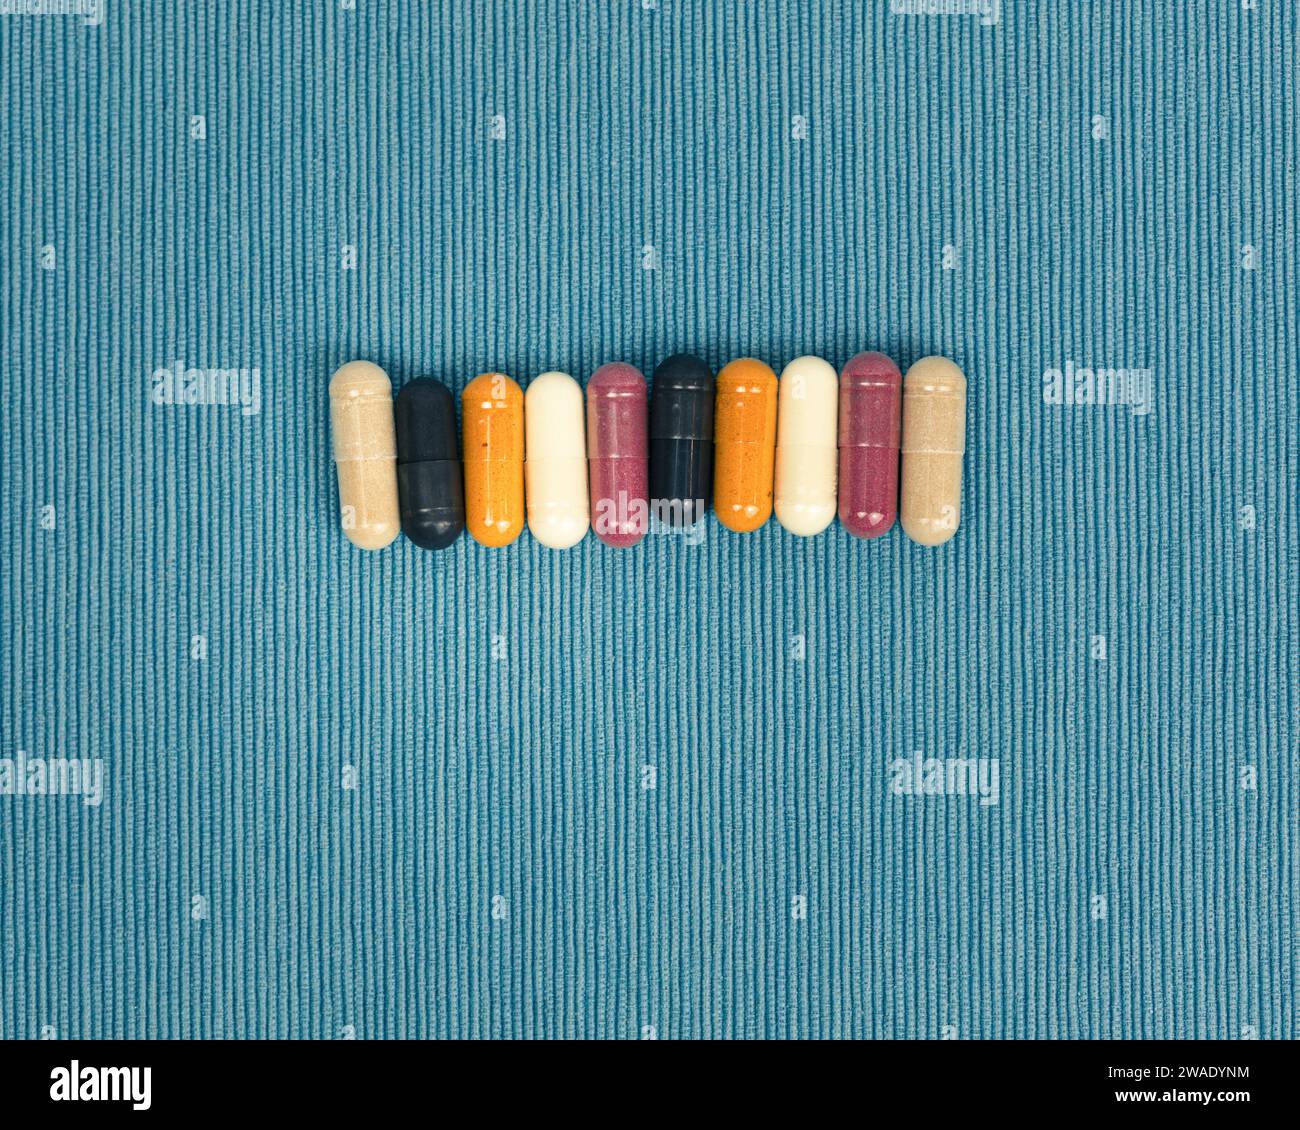 Top view of a variety of vitamin and mineral supplements in capsules. Multicolored pills in orange and red on a blue textured background. Stock Photo